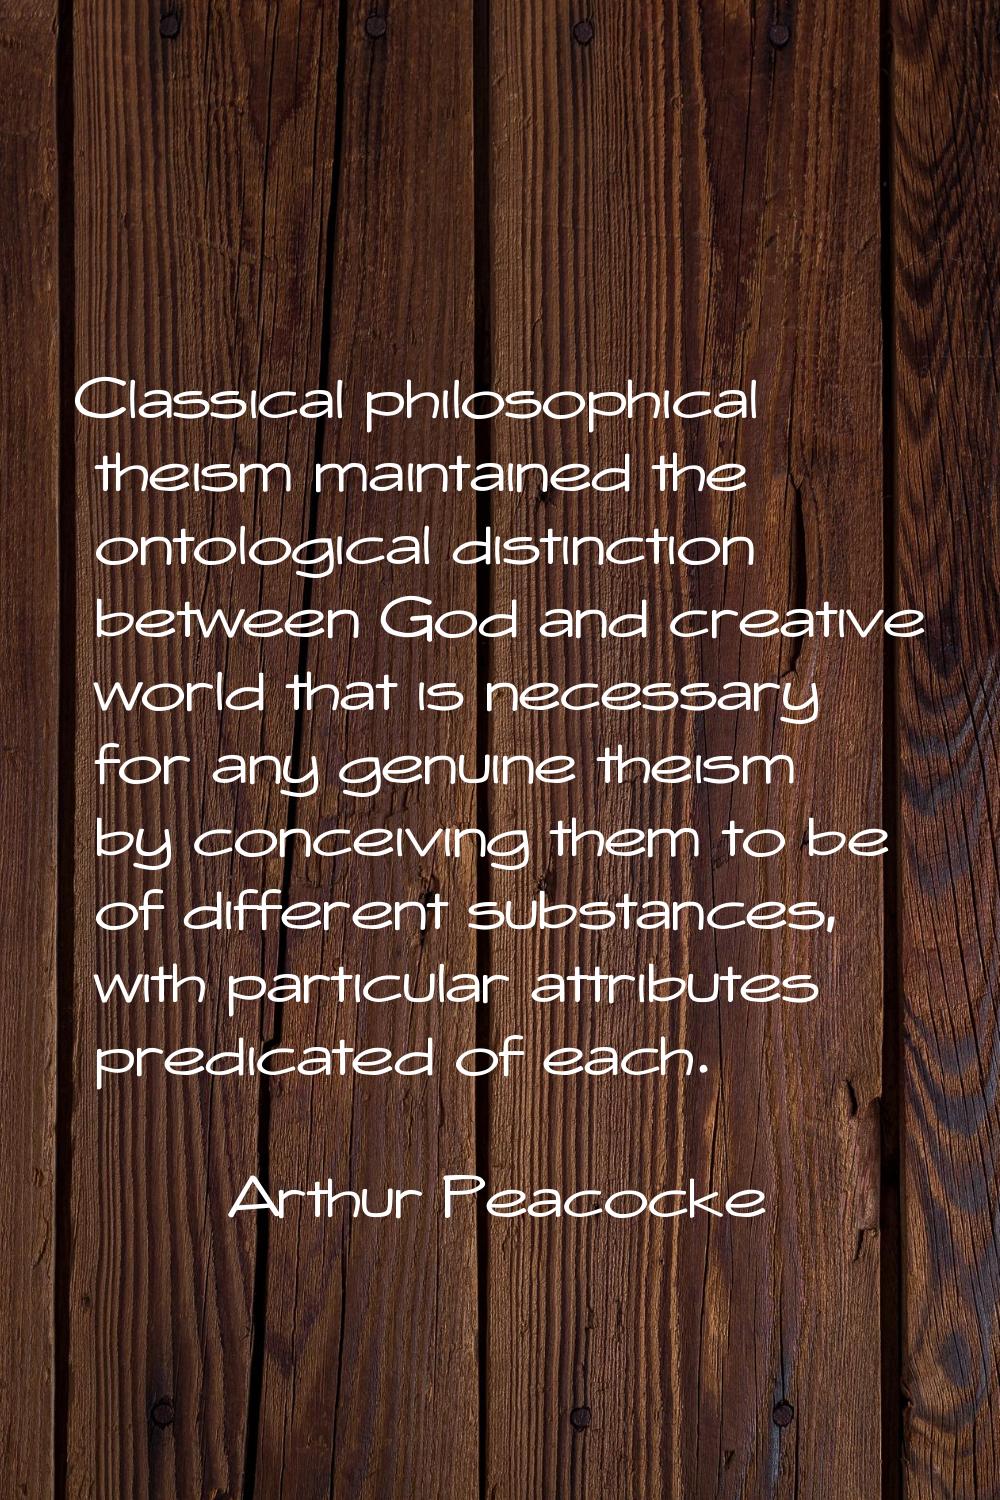 Classical philosophical theism maintained the ontological distinction between God and creative worl